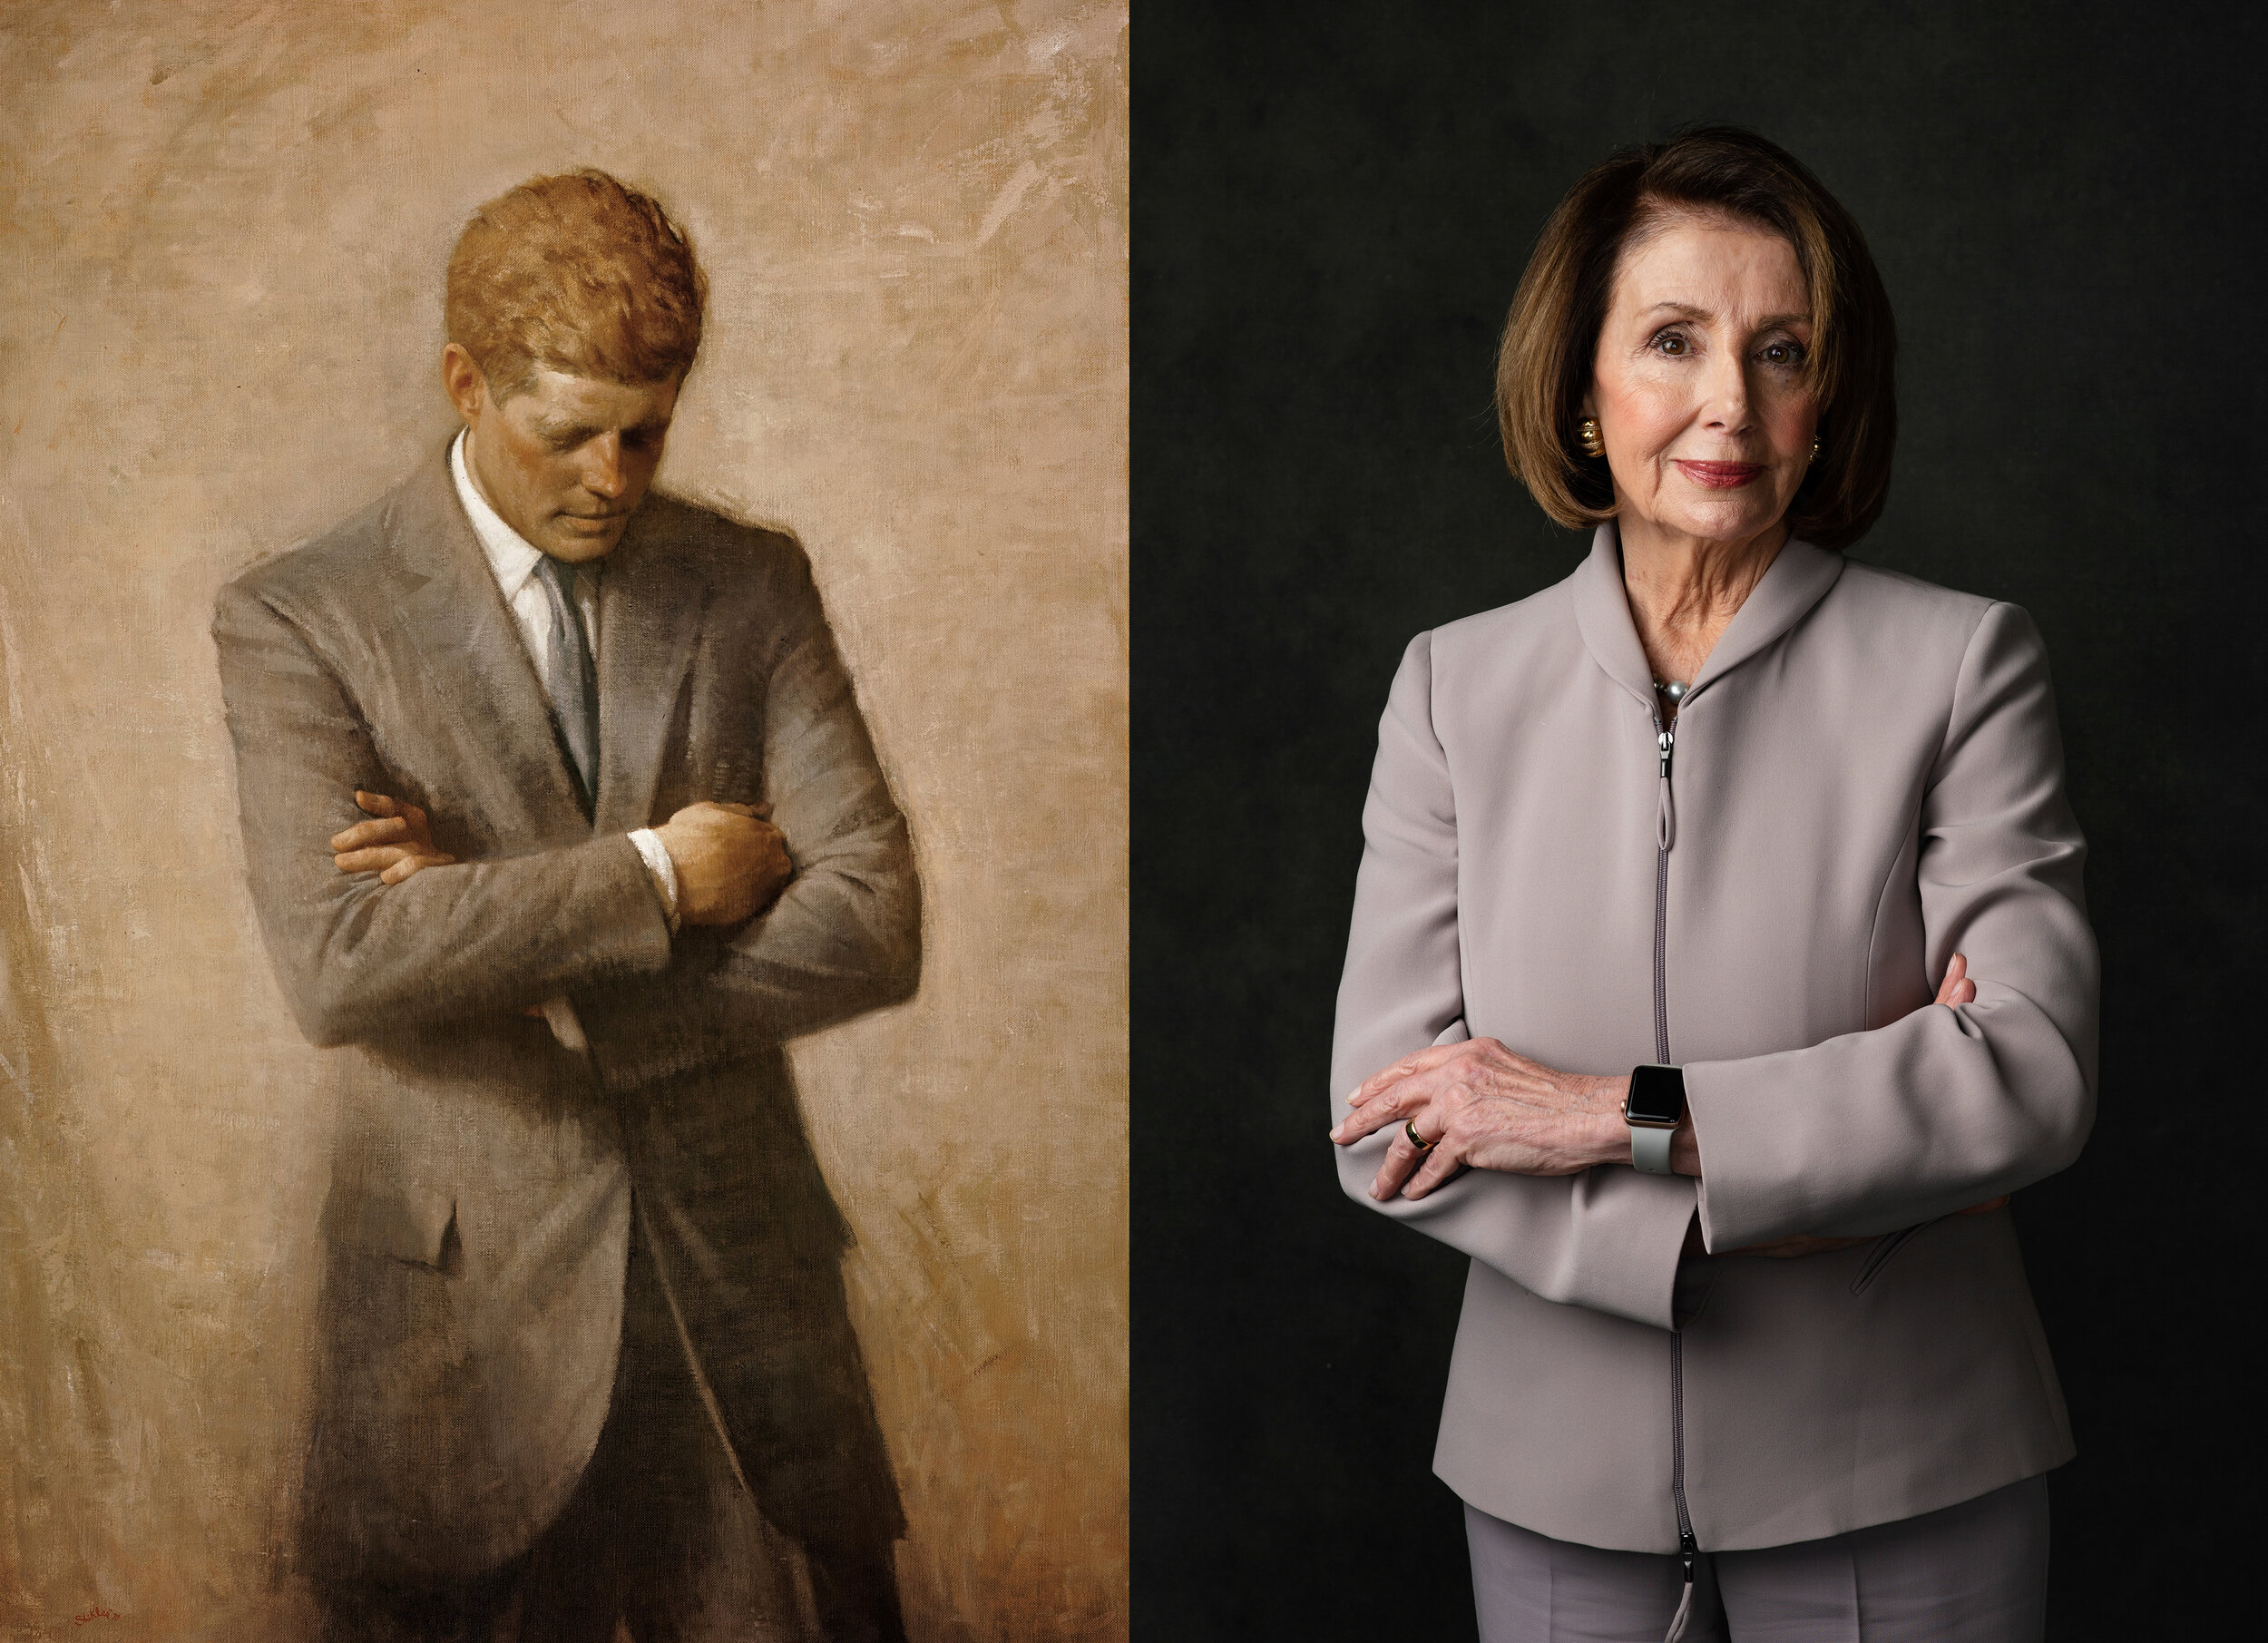  John F. Kennedy, the 35th president of the U.S., painted posthostumously by Aaron Shikler; Speaker Nancy Pelosi (D-CA), representing California’s 12th district, first elected to the House in 1987. In 1971, Mr. Shikler told the  Washington Post , “I 